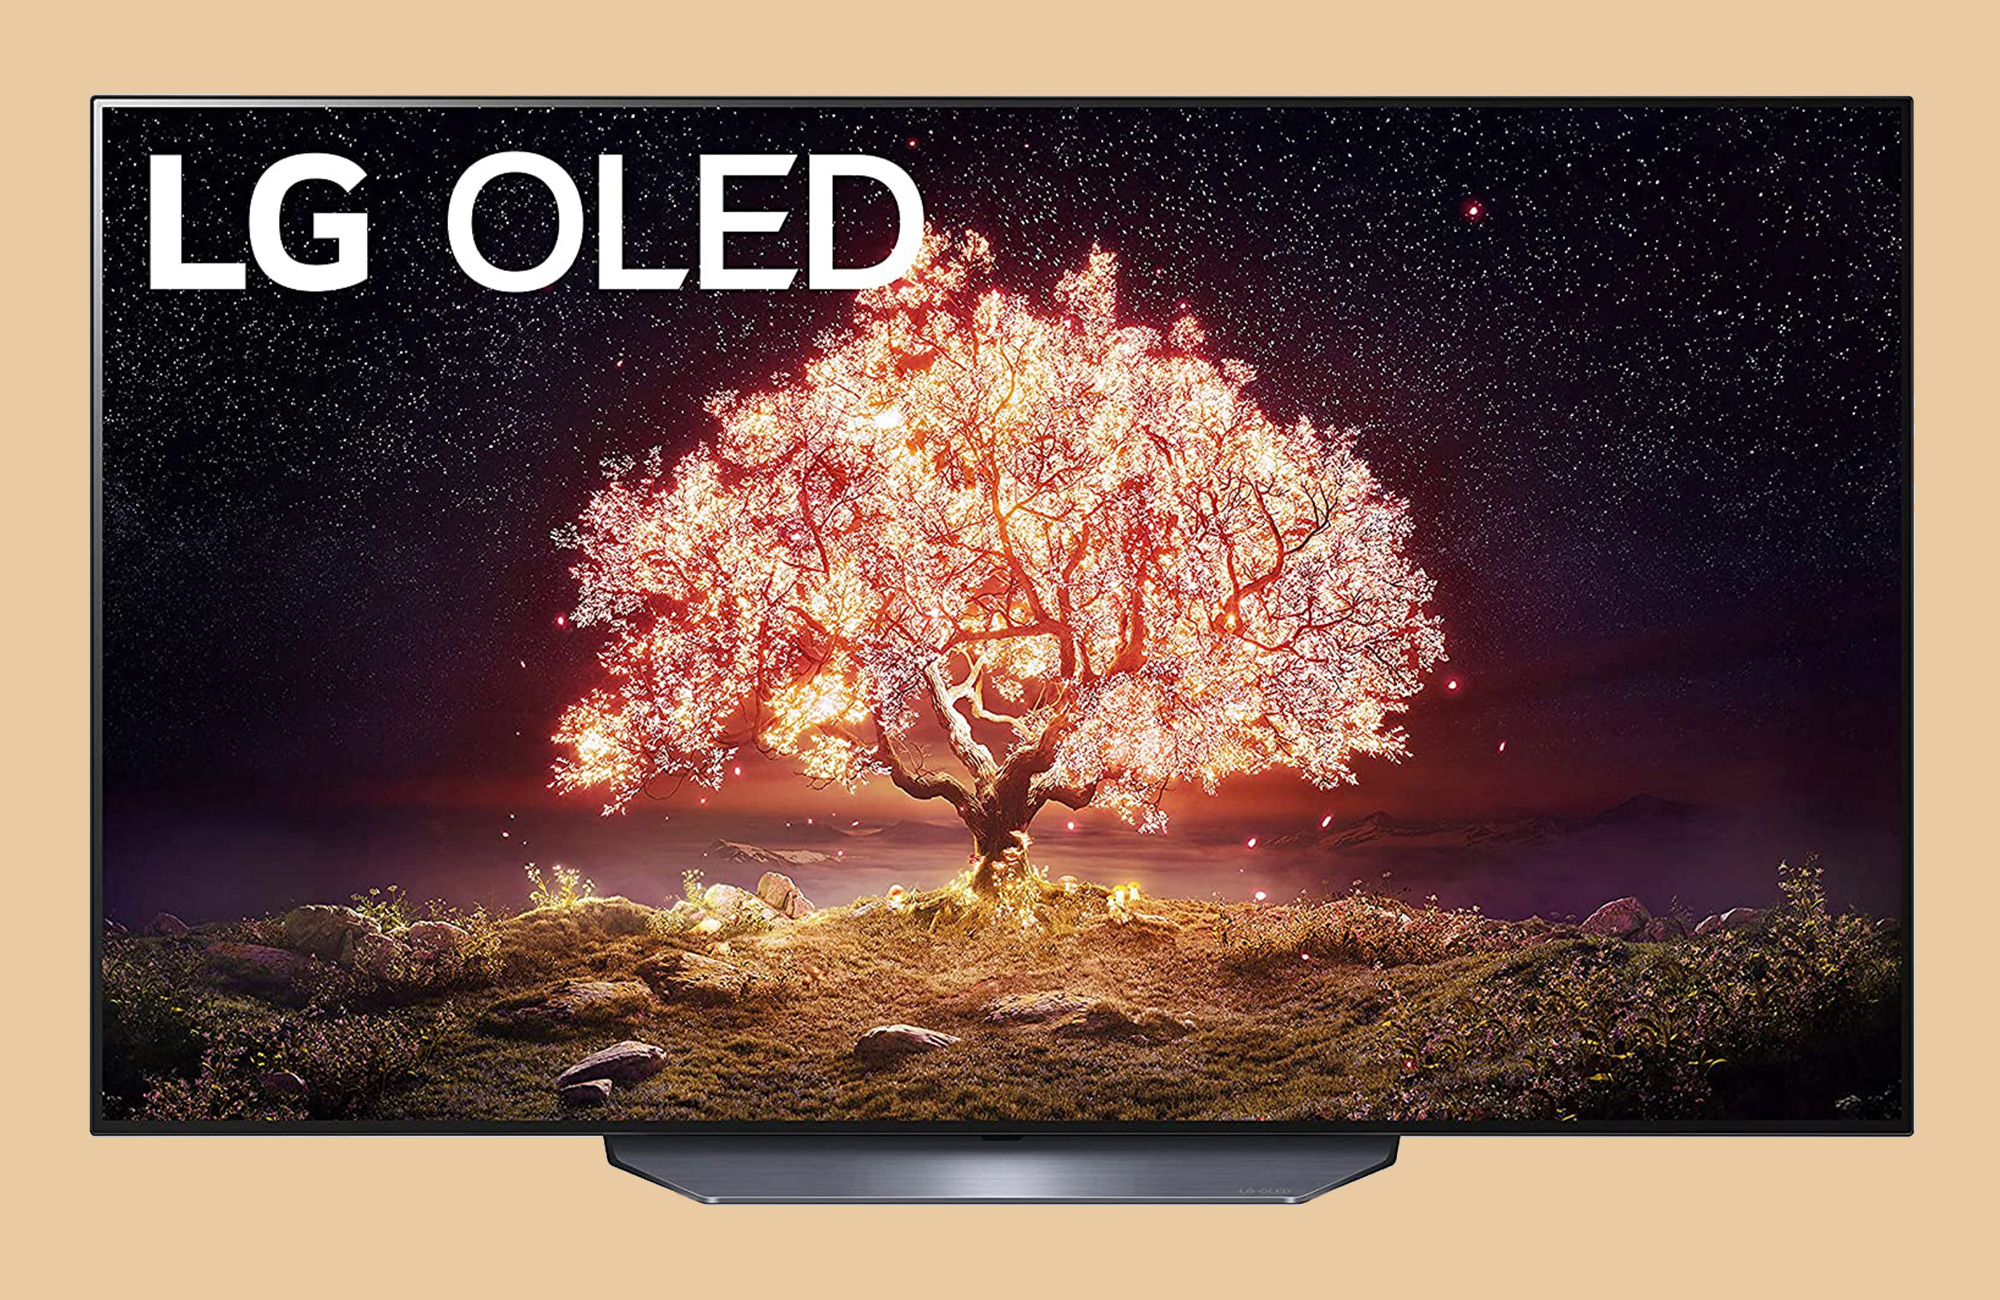 LG Prime Day OLED TV deal 65-inch